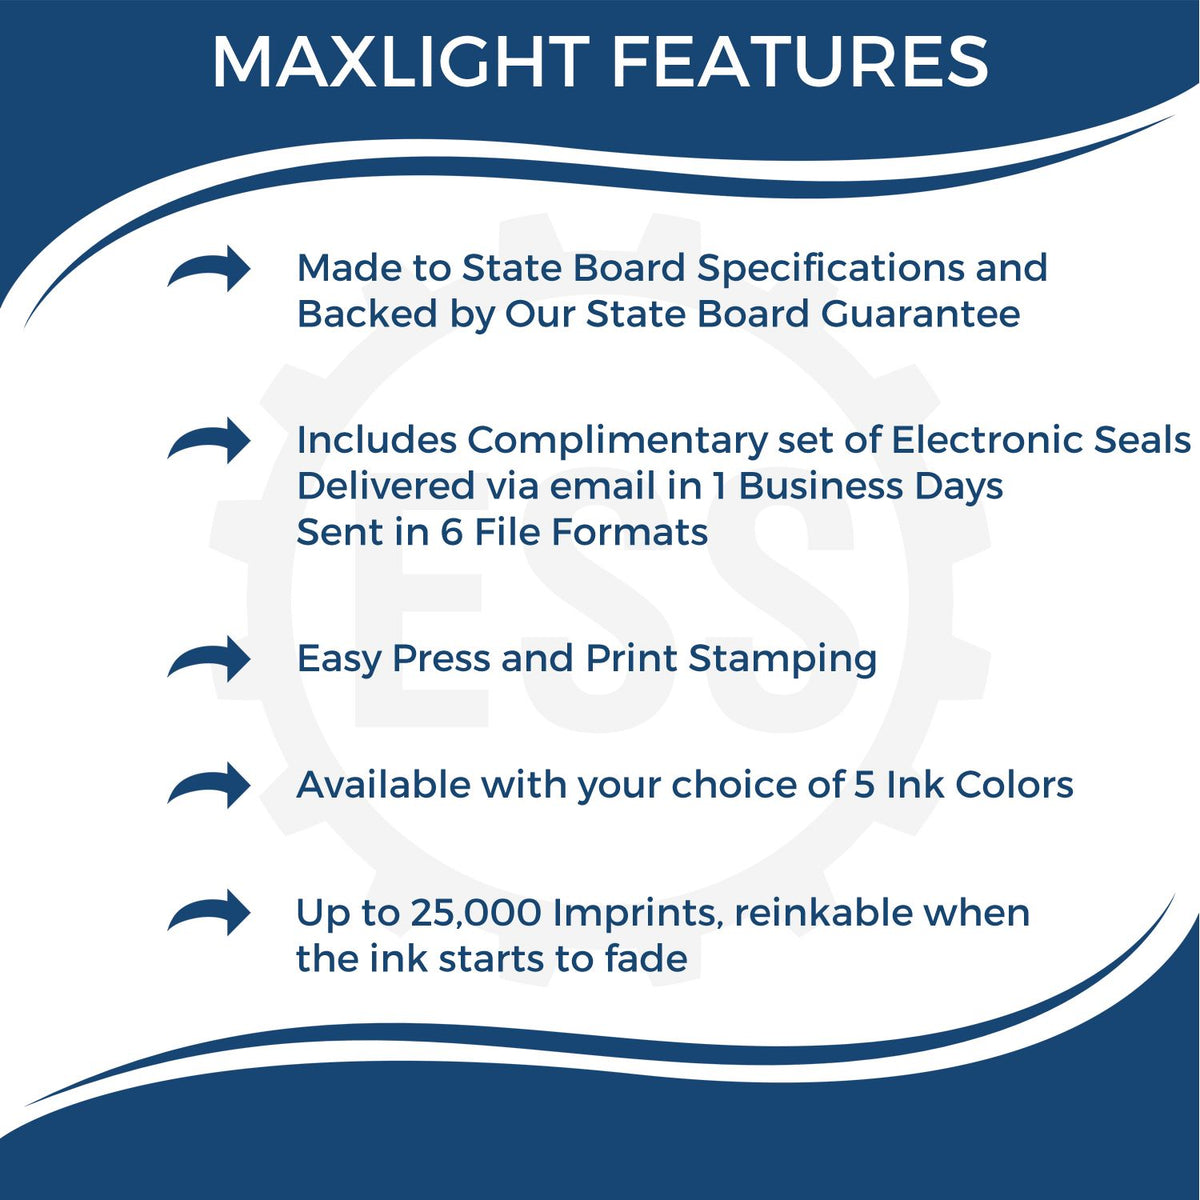 A picture of an infographic highlighting the selling points for the Premium MaxLight Pre-Inked New Hampshire Landscape Architectural Stamp